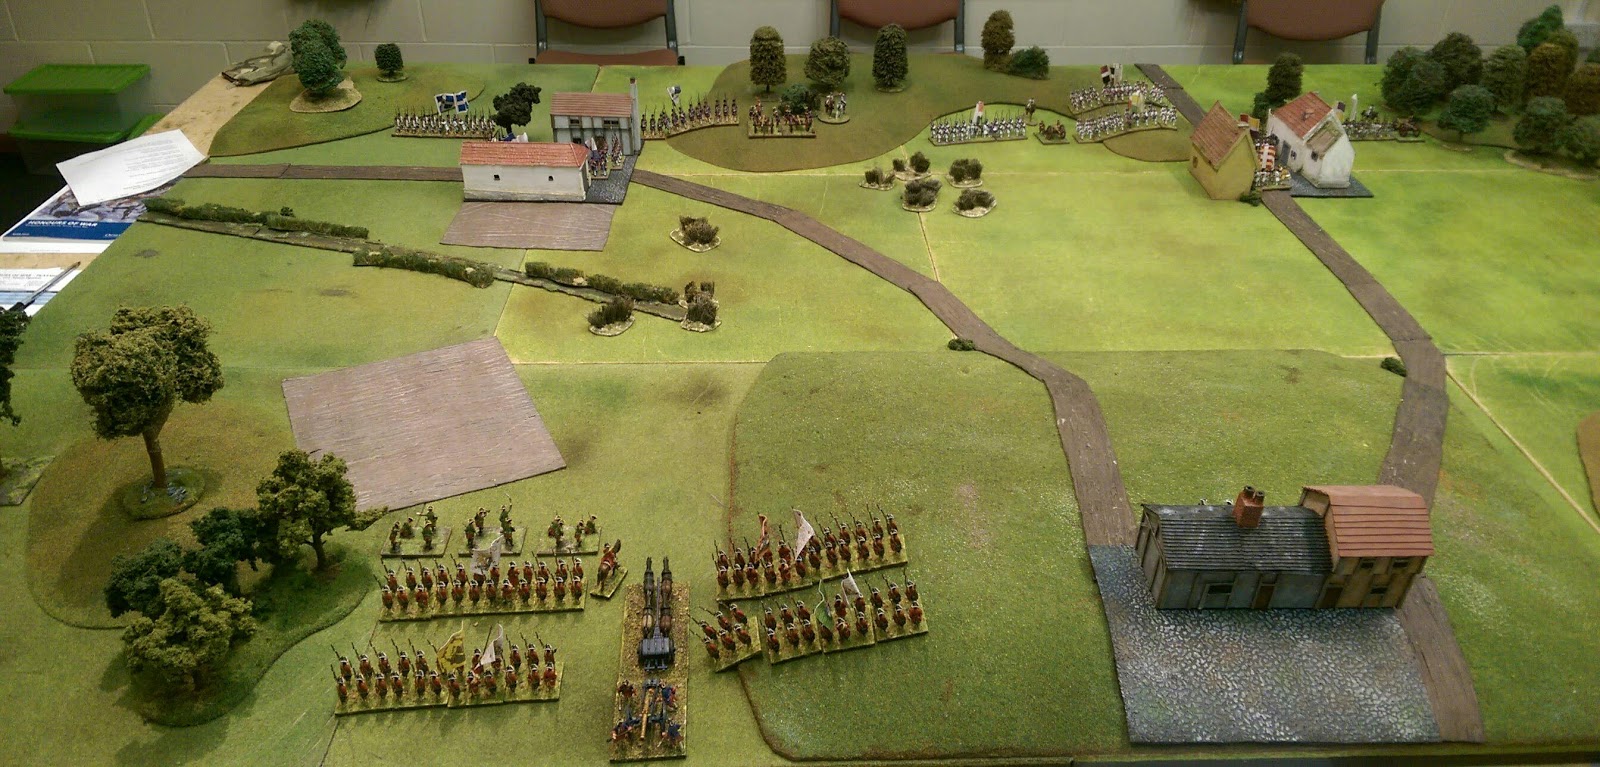 Looking at the French positions